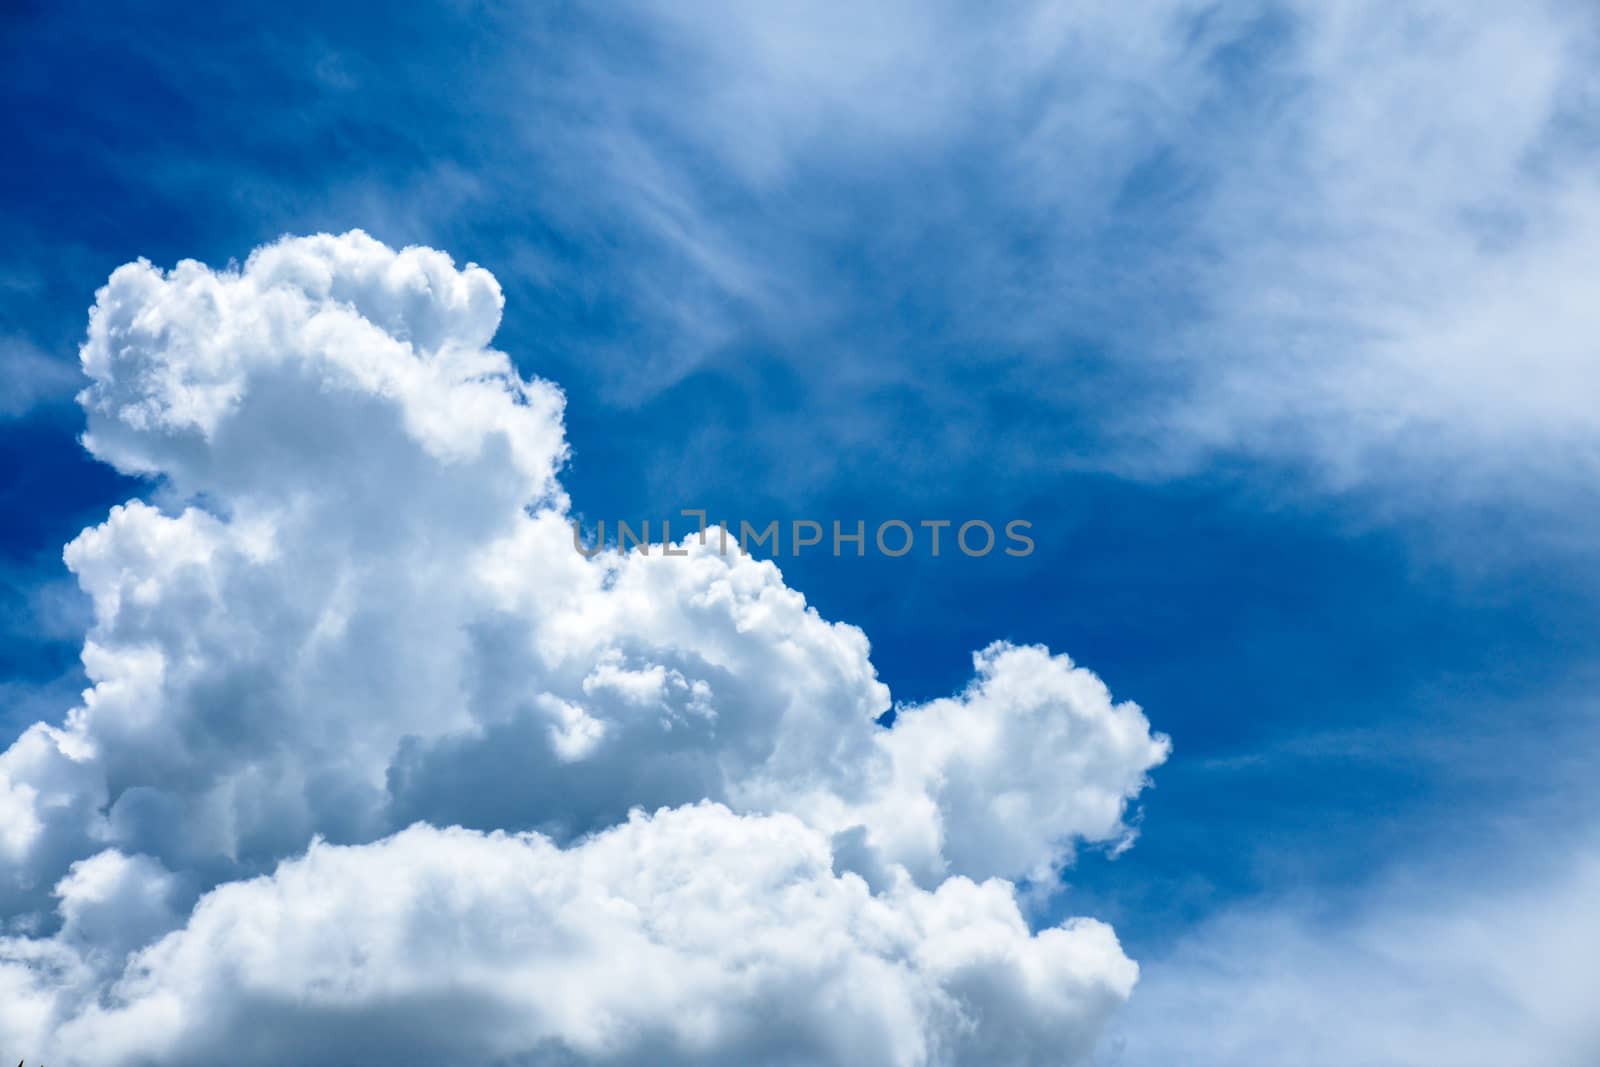 Beautiful rainclouds in the blue sky at Chiangmai city, Northern Thailand.